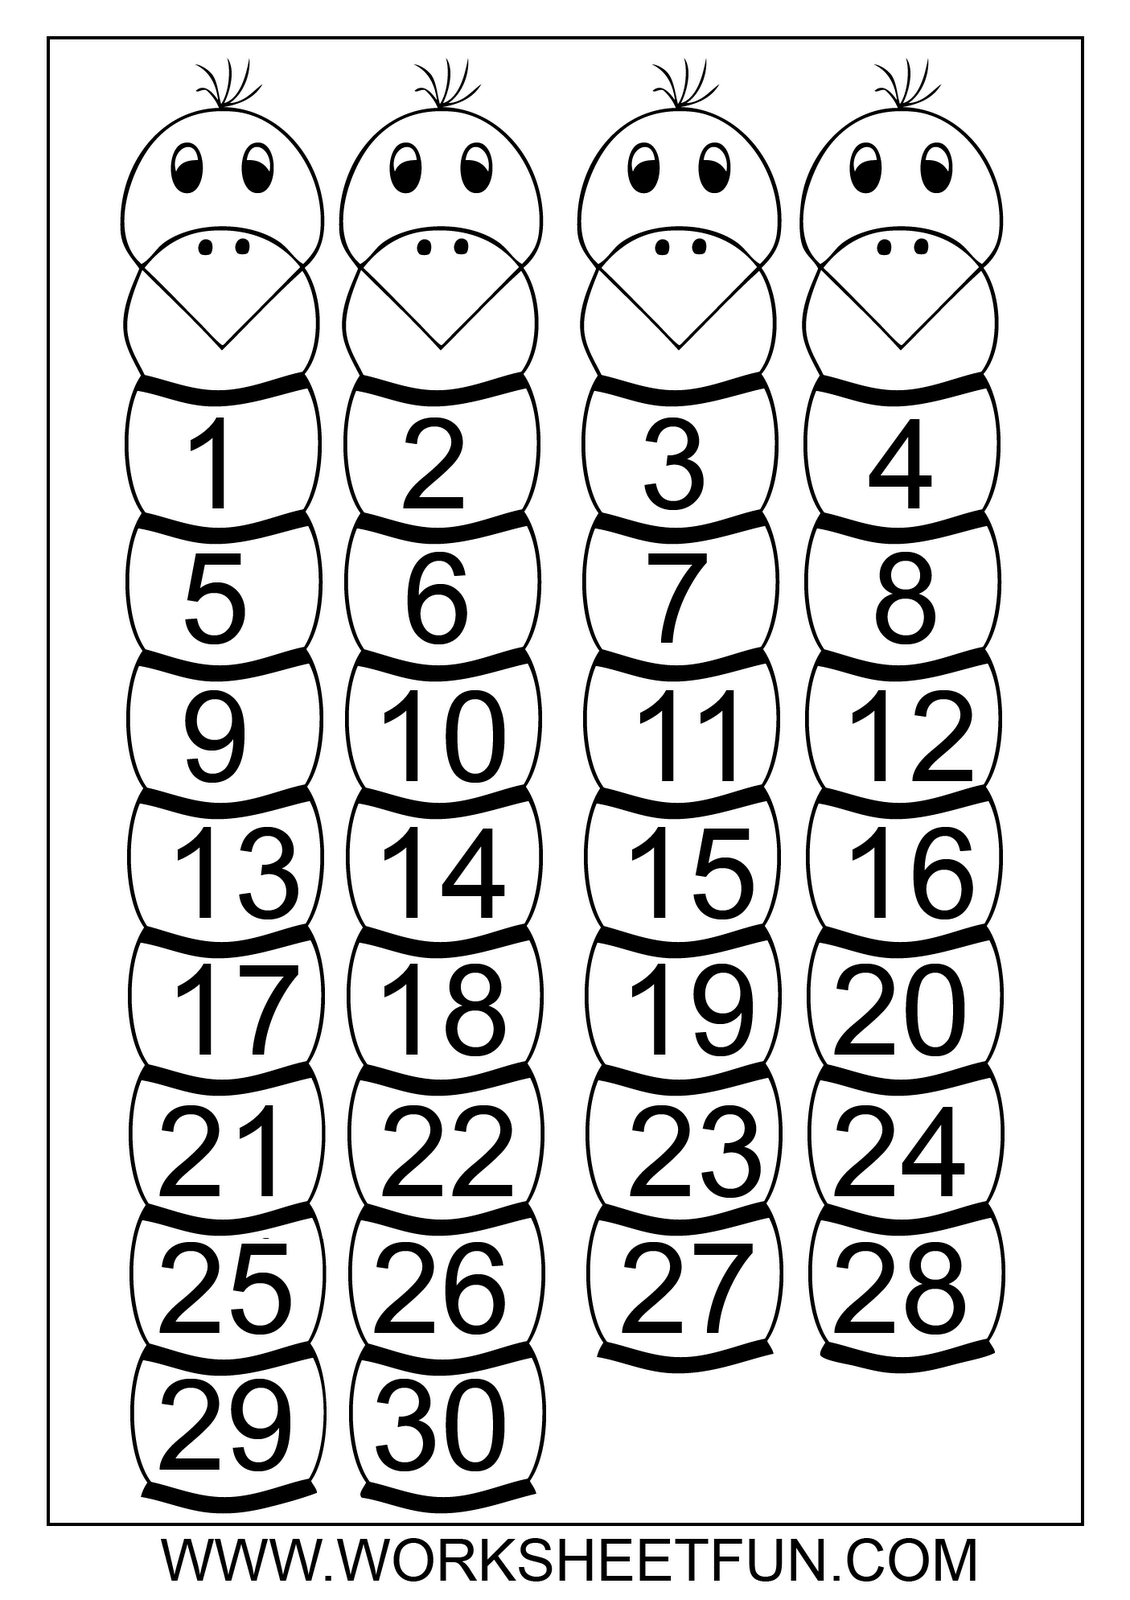 10-best-images-of-counting-worksheets-1-30-printable-missing-numbers-worksheets-1-30